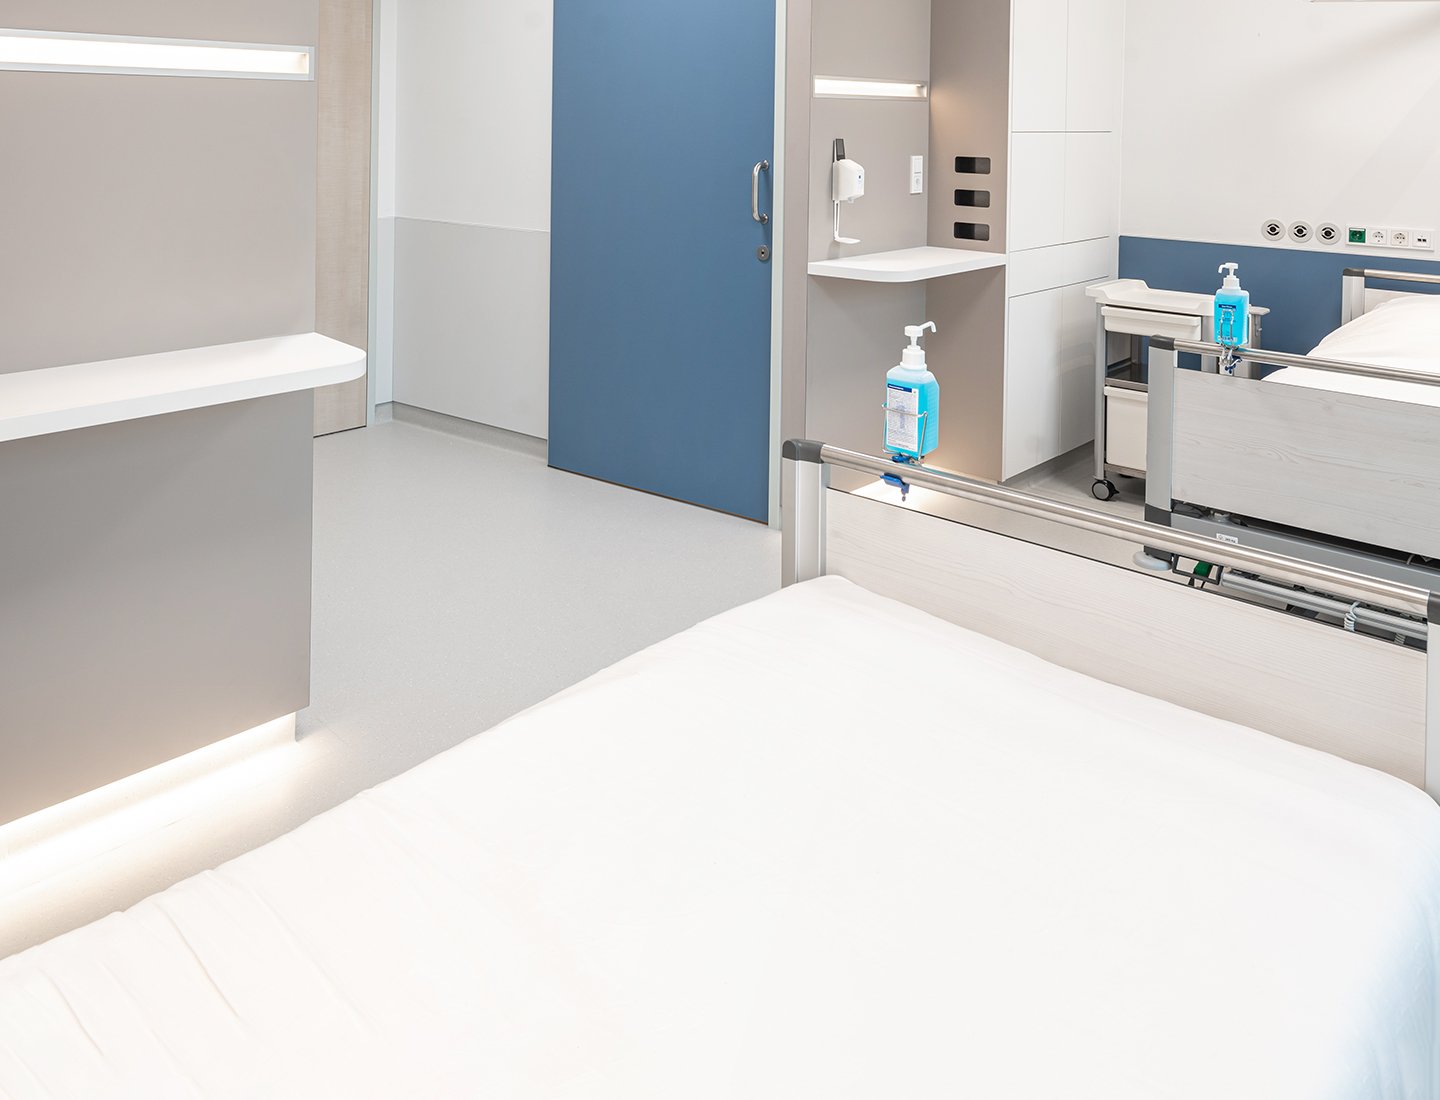 KARMIN research team designs infection-proof patient room for hospitals